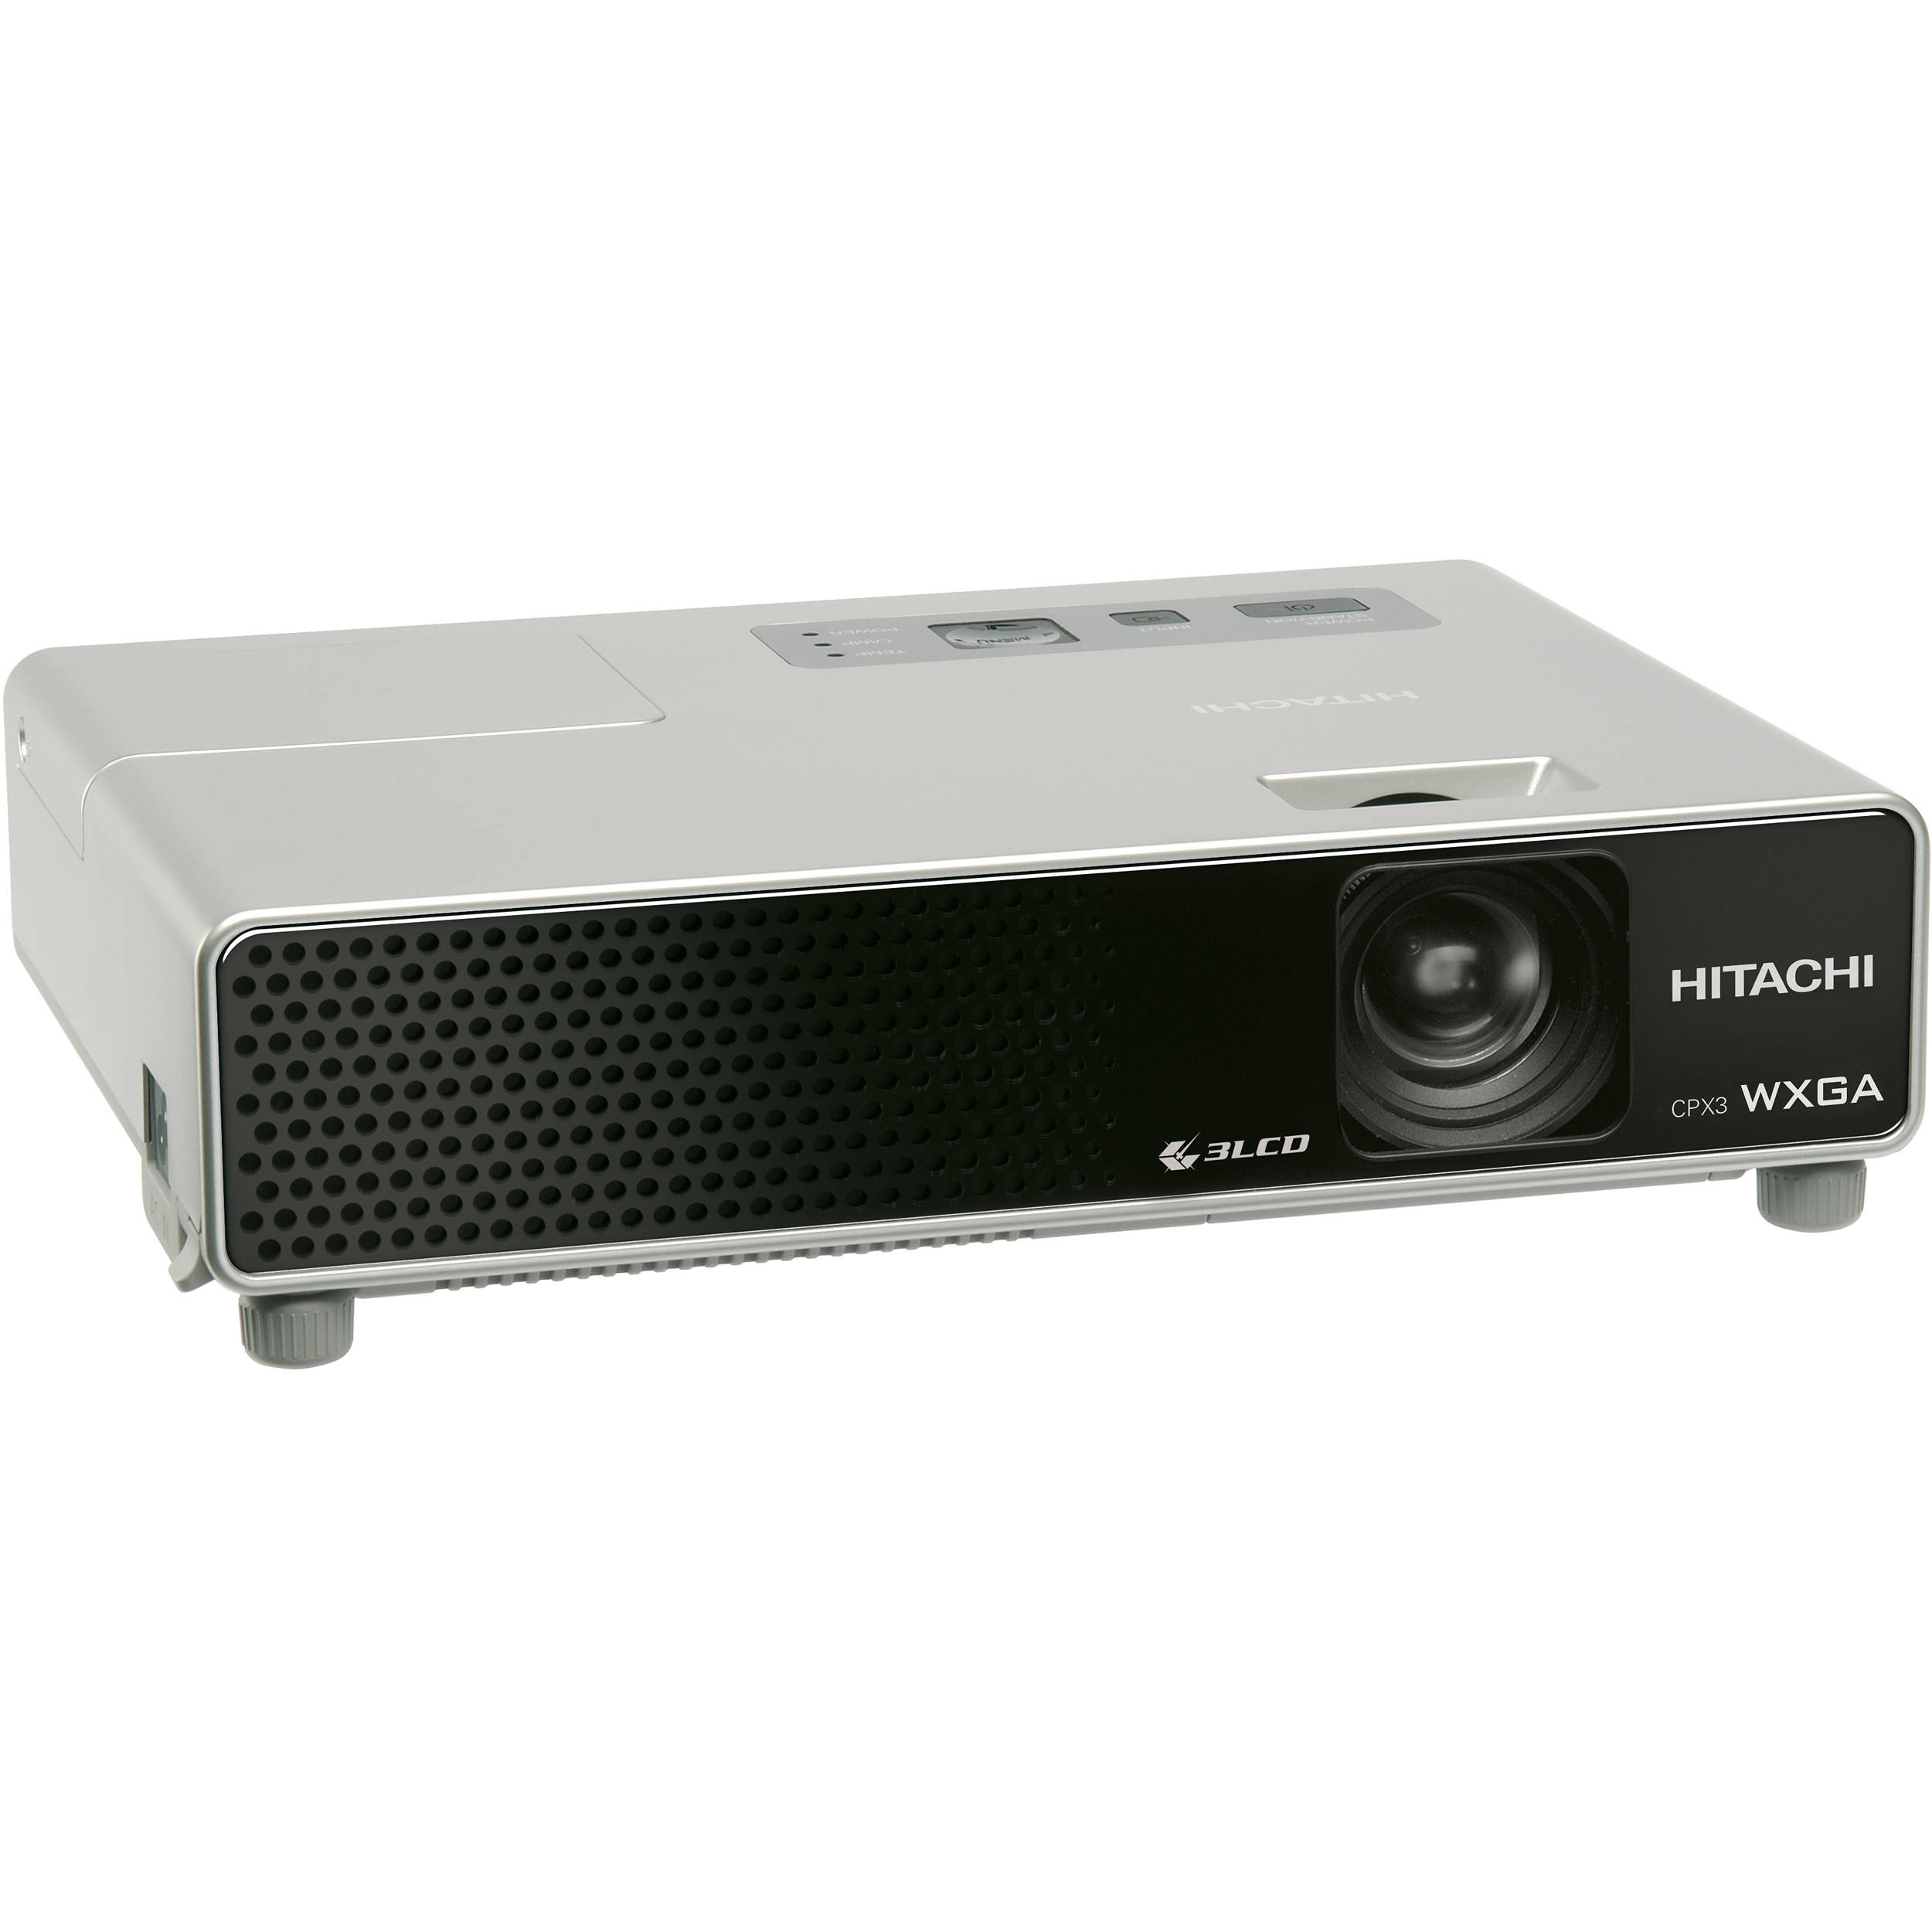 CPX3 - CP X3 WXGA LCD Projector